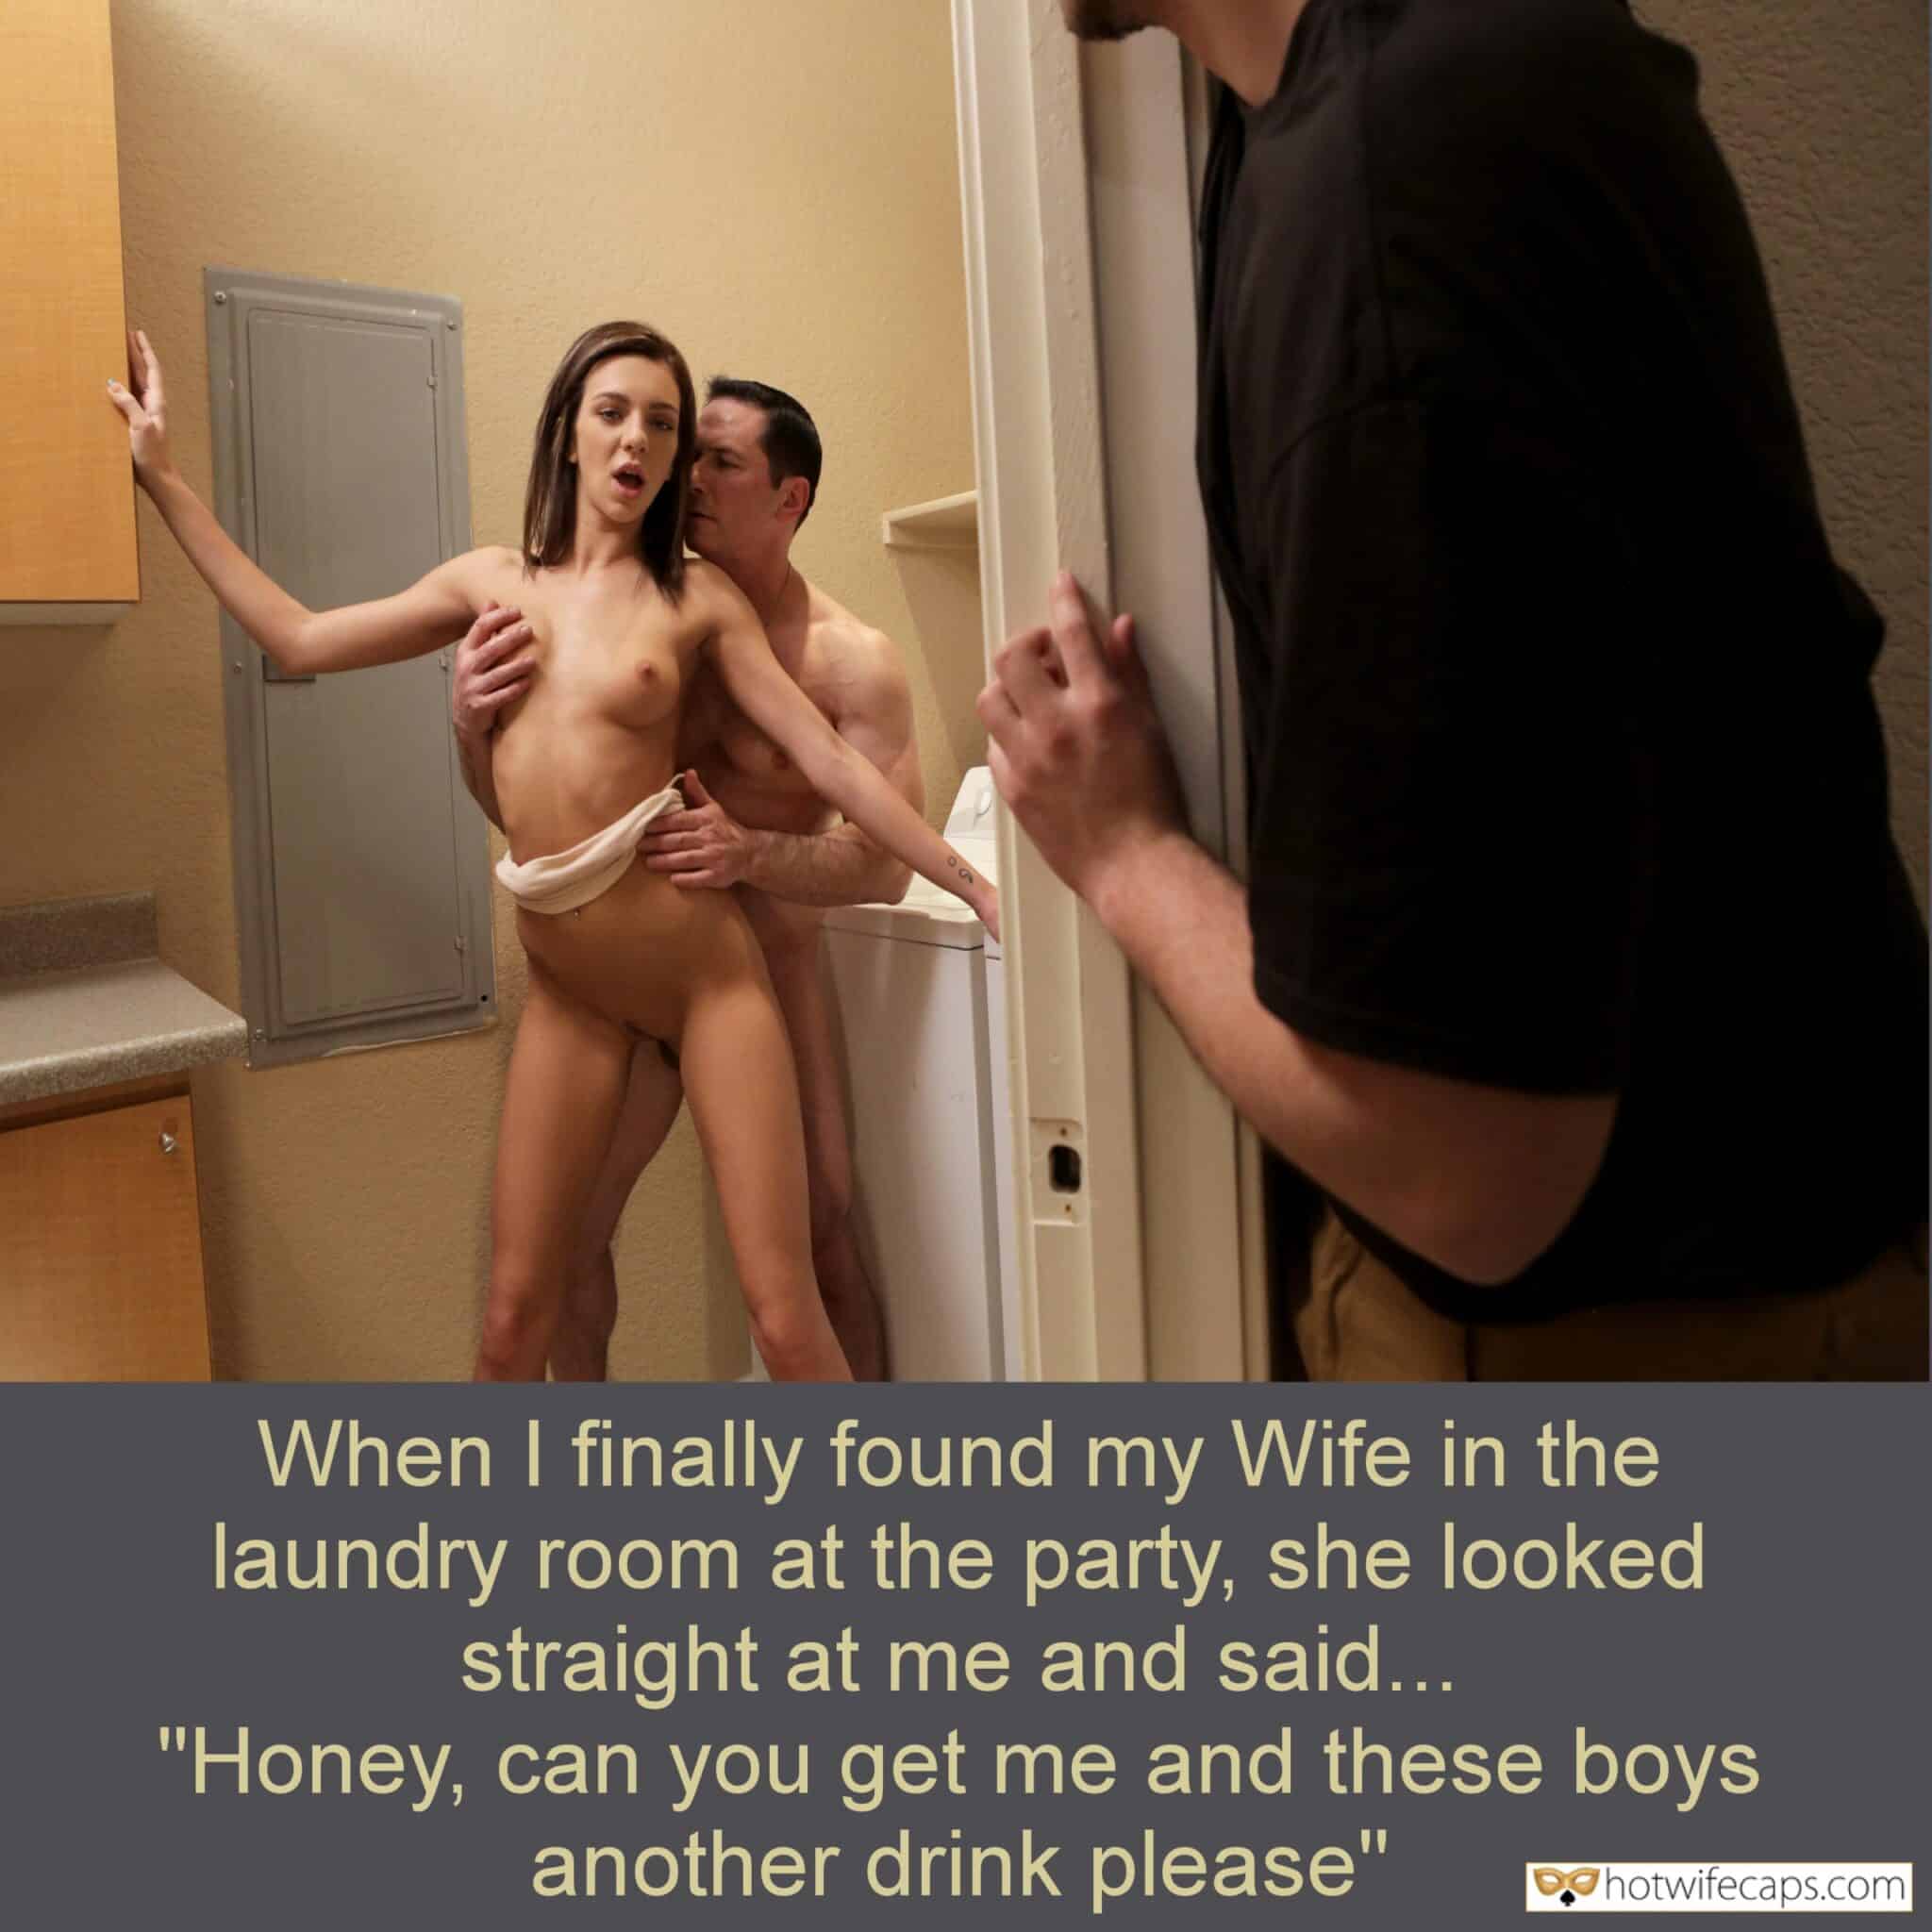 Cheating, Femdom, Humiliation, Public Hotwife Caption №14254 when i caught her fucking bitch refused to stop